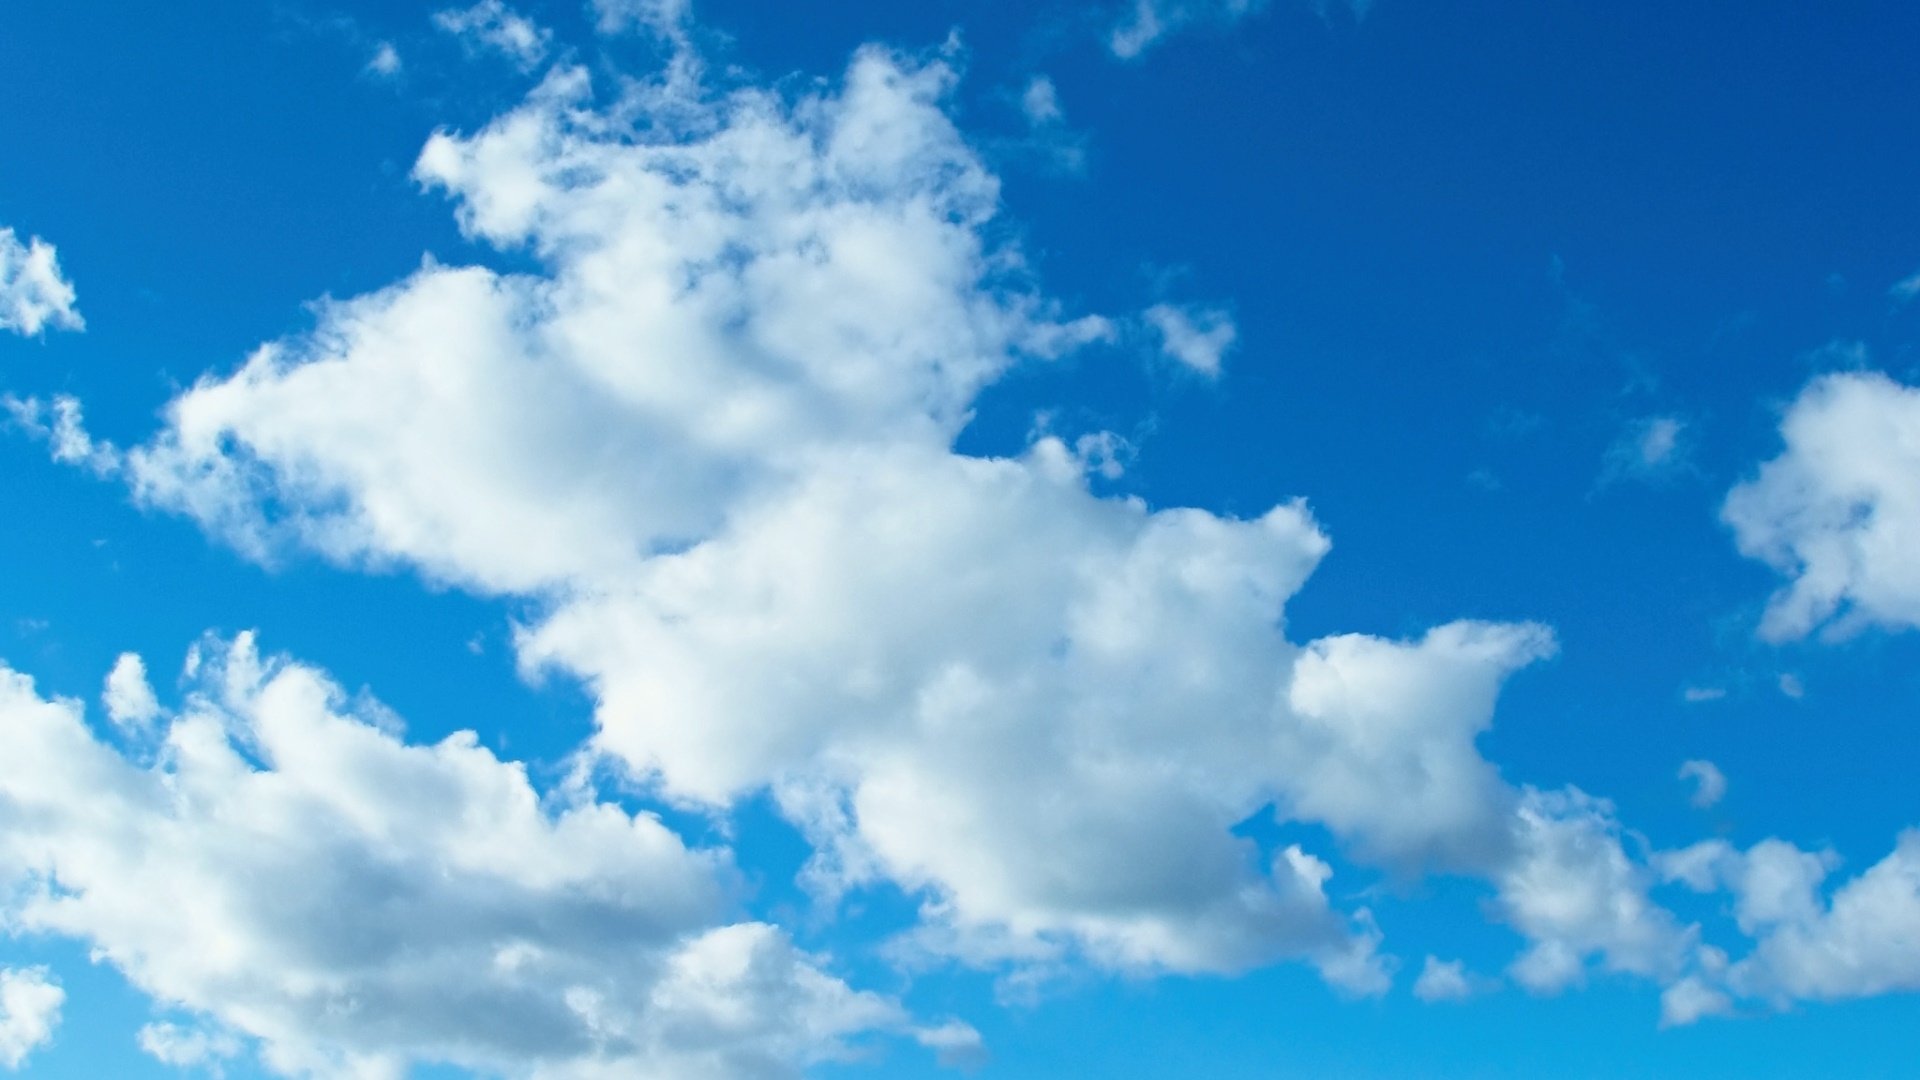 White Puffy Clouds in Blue Sky HD Wallpaper | Background Image | 1920x1080